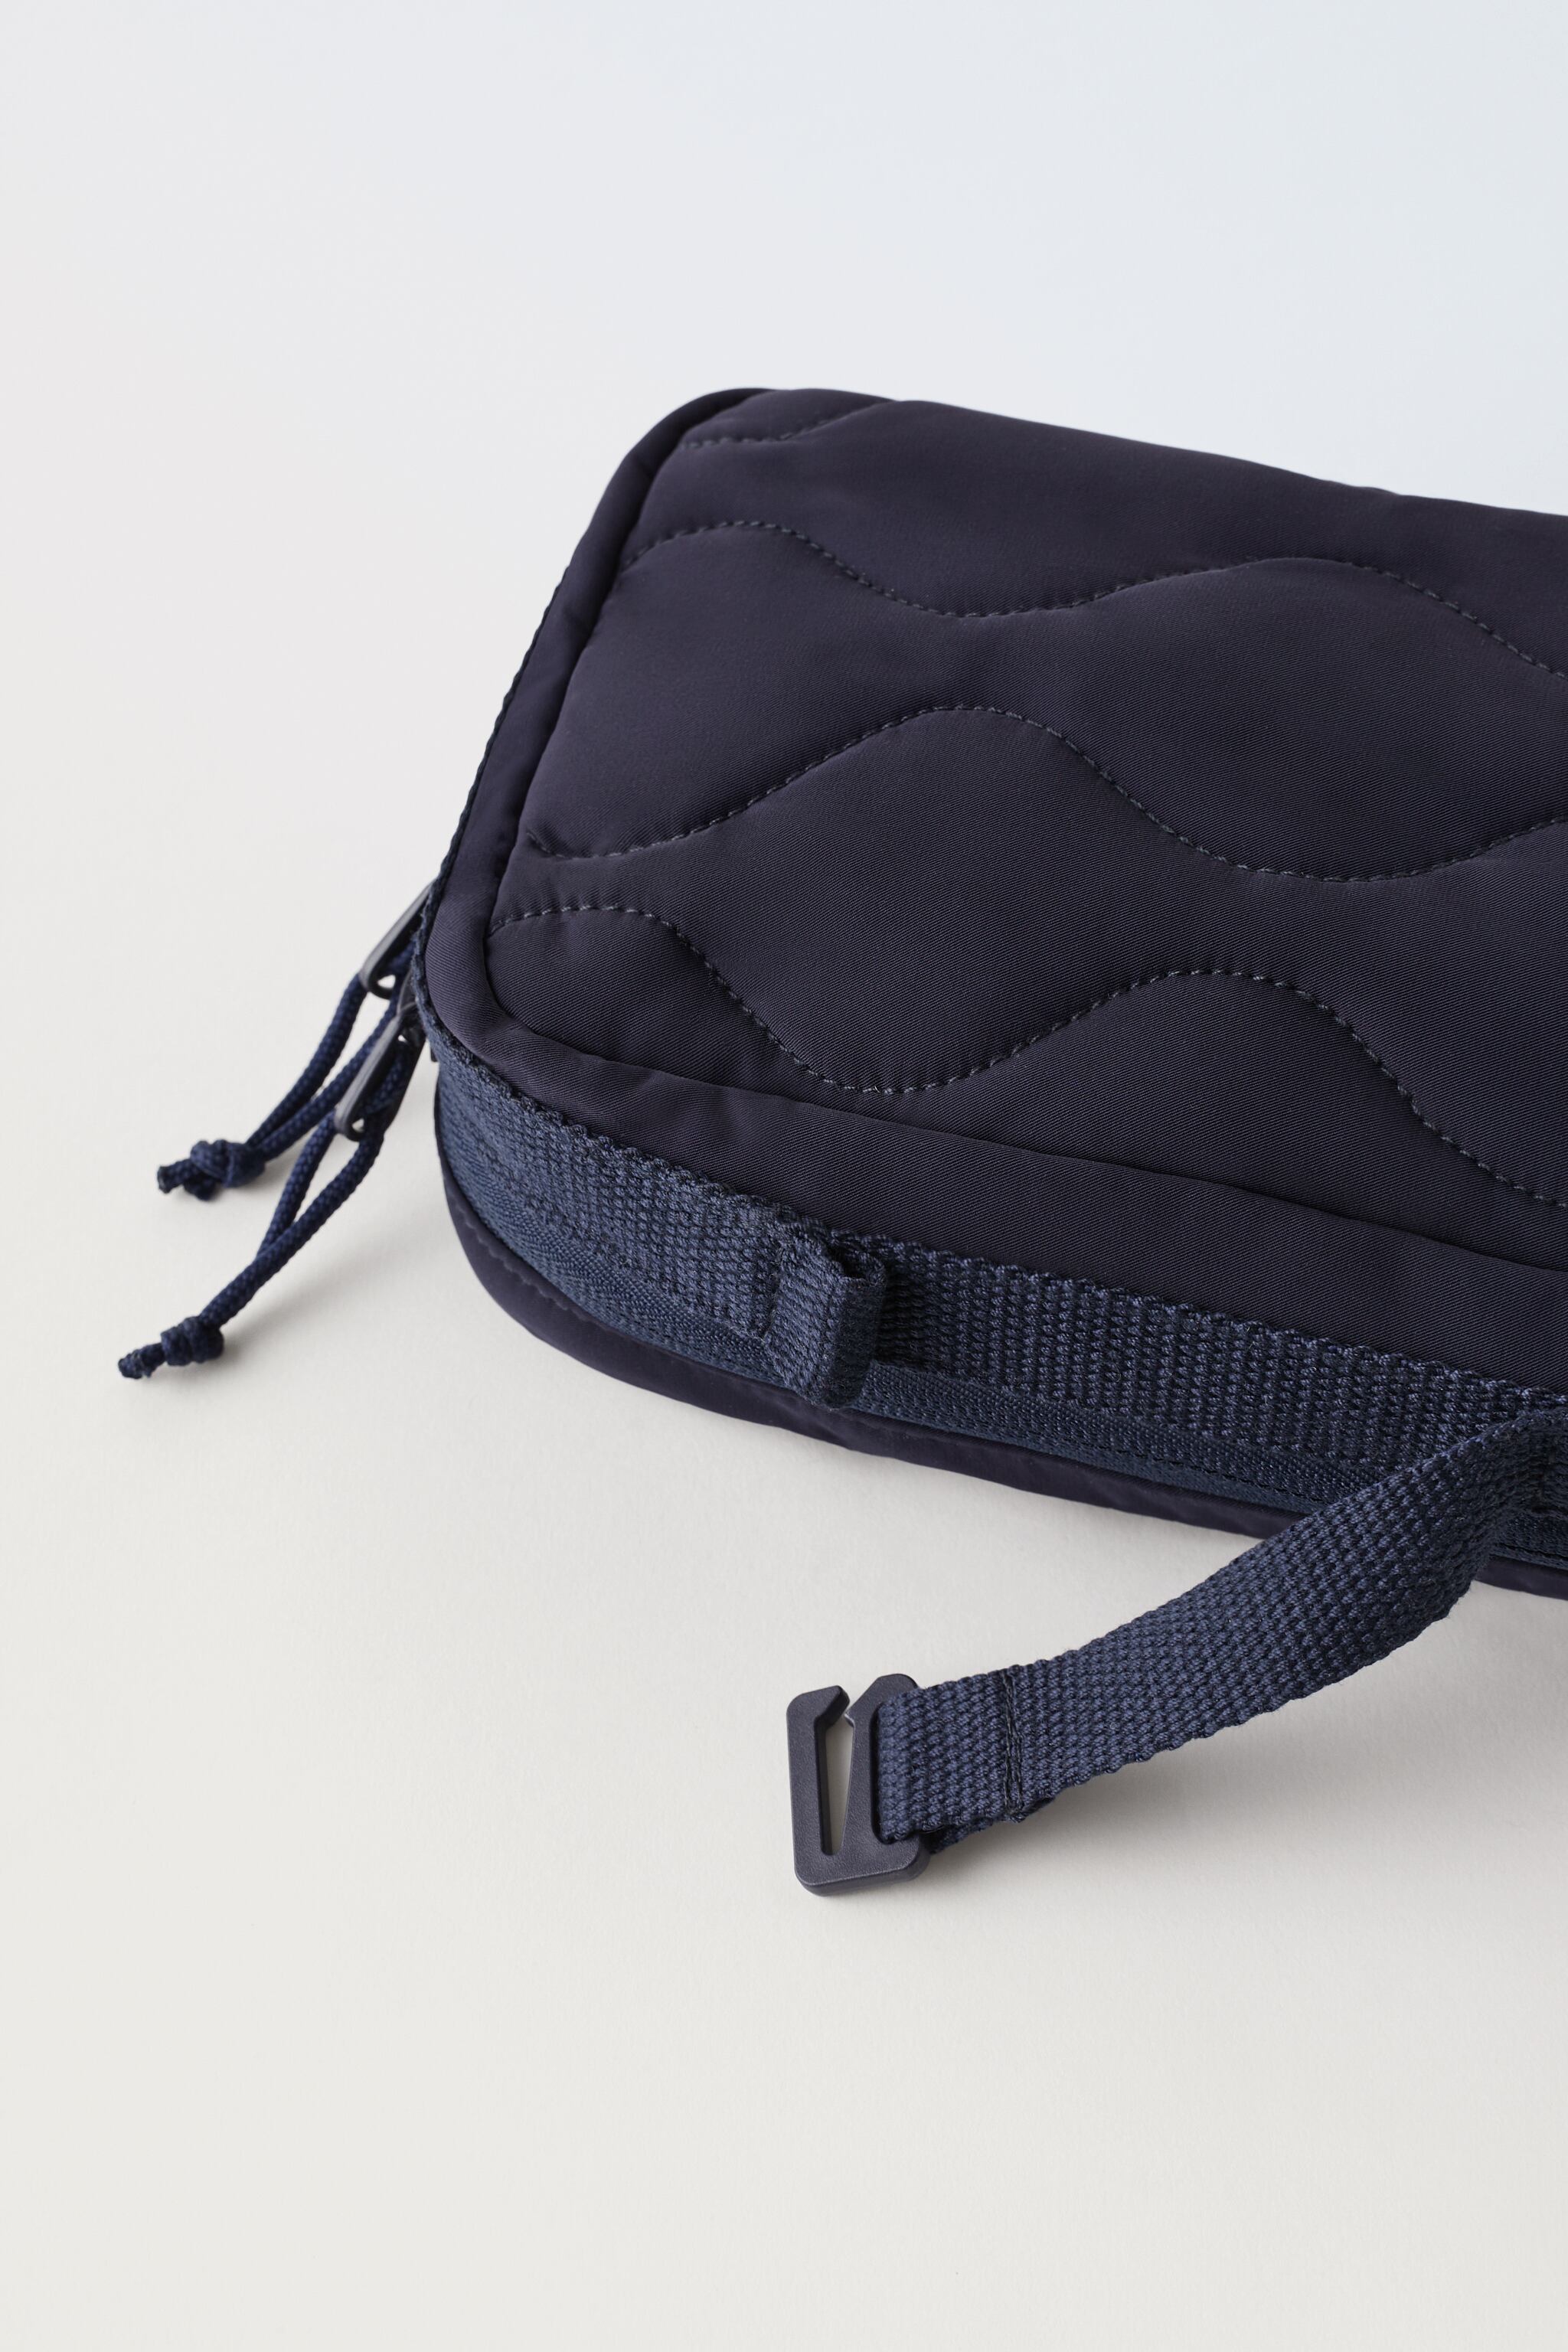 QUILTED TOILETRY BAG